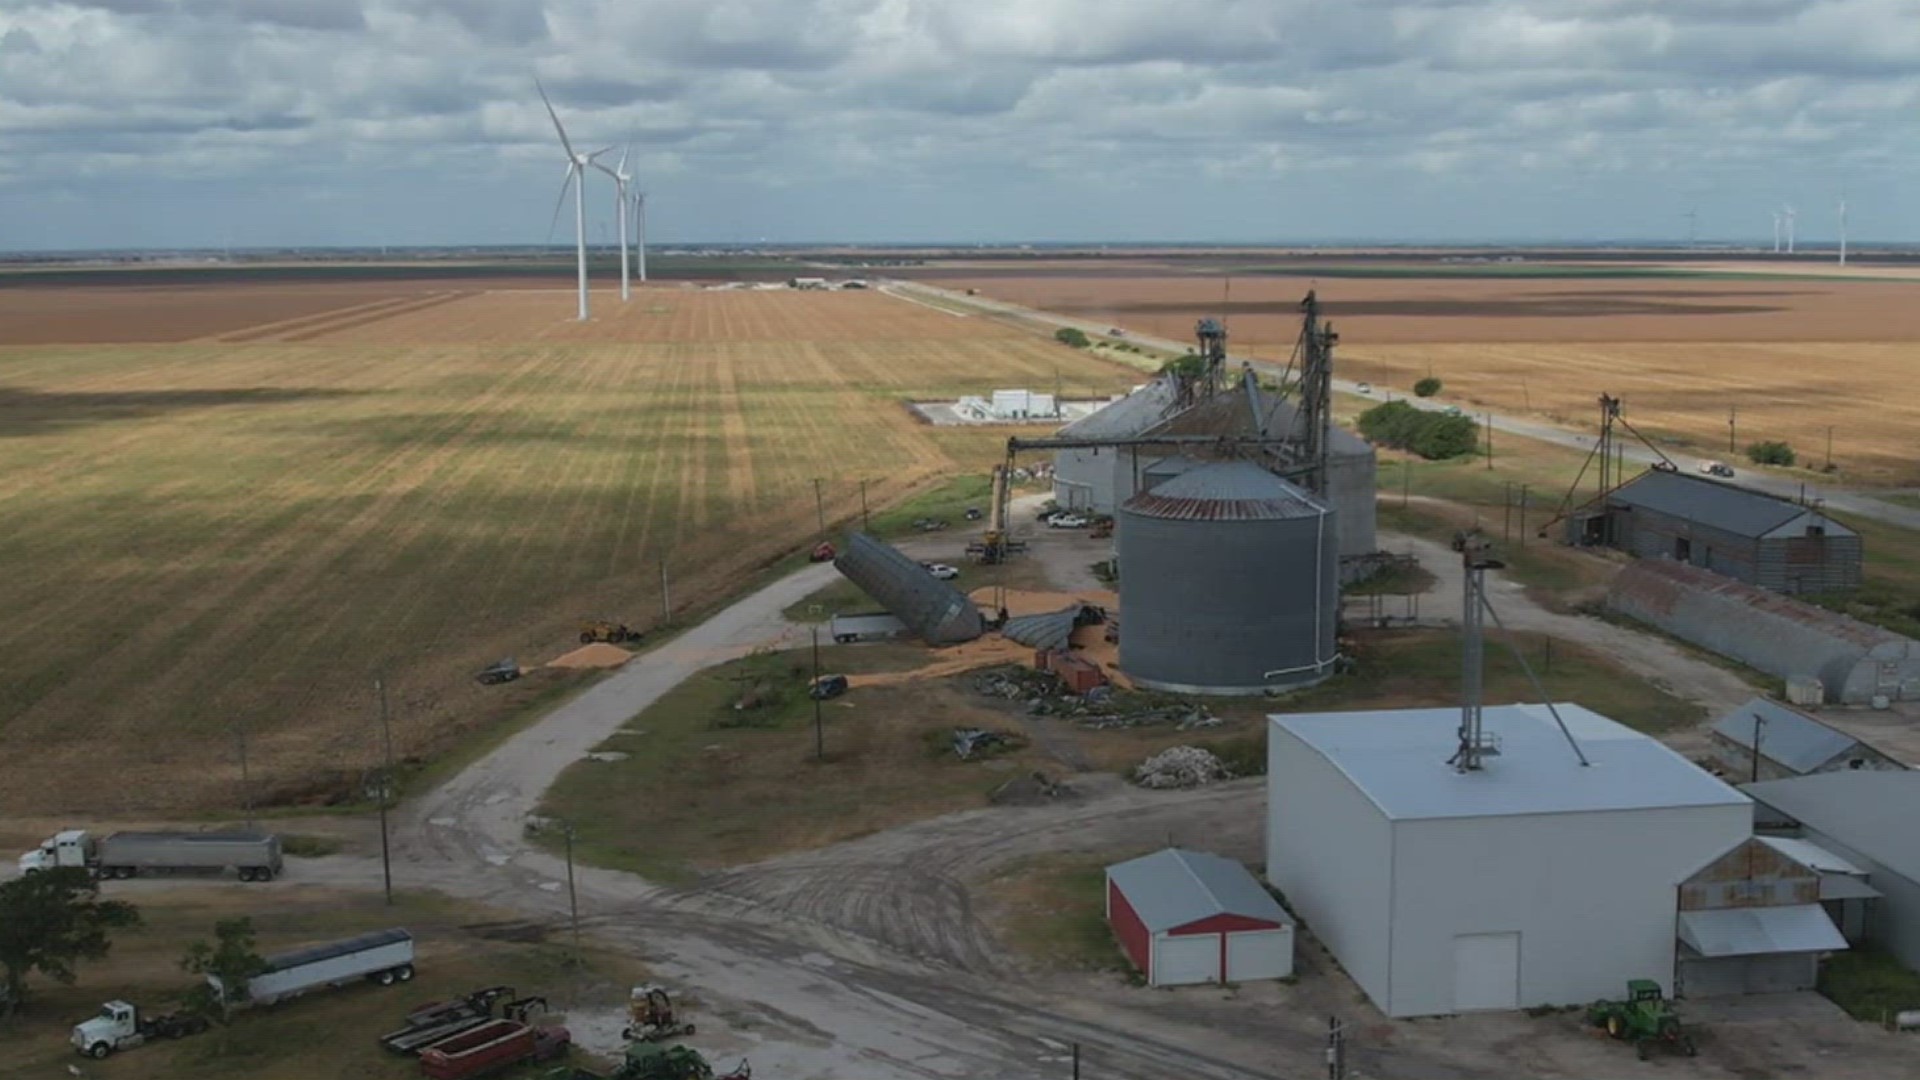 An eyewitness to Tuesday's incident told investigators that one of the three victims was on top of the grain silo, while the other two were on the ground.